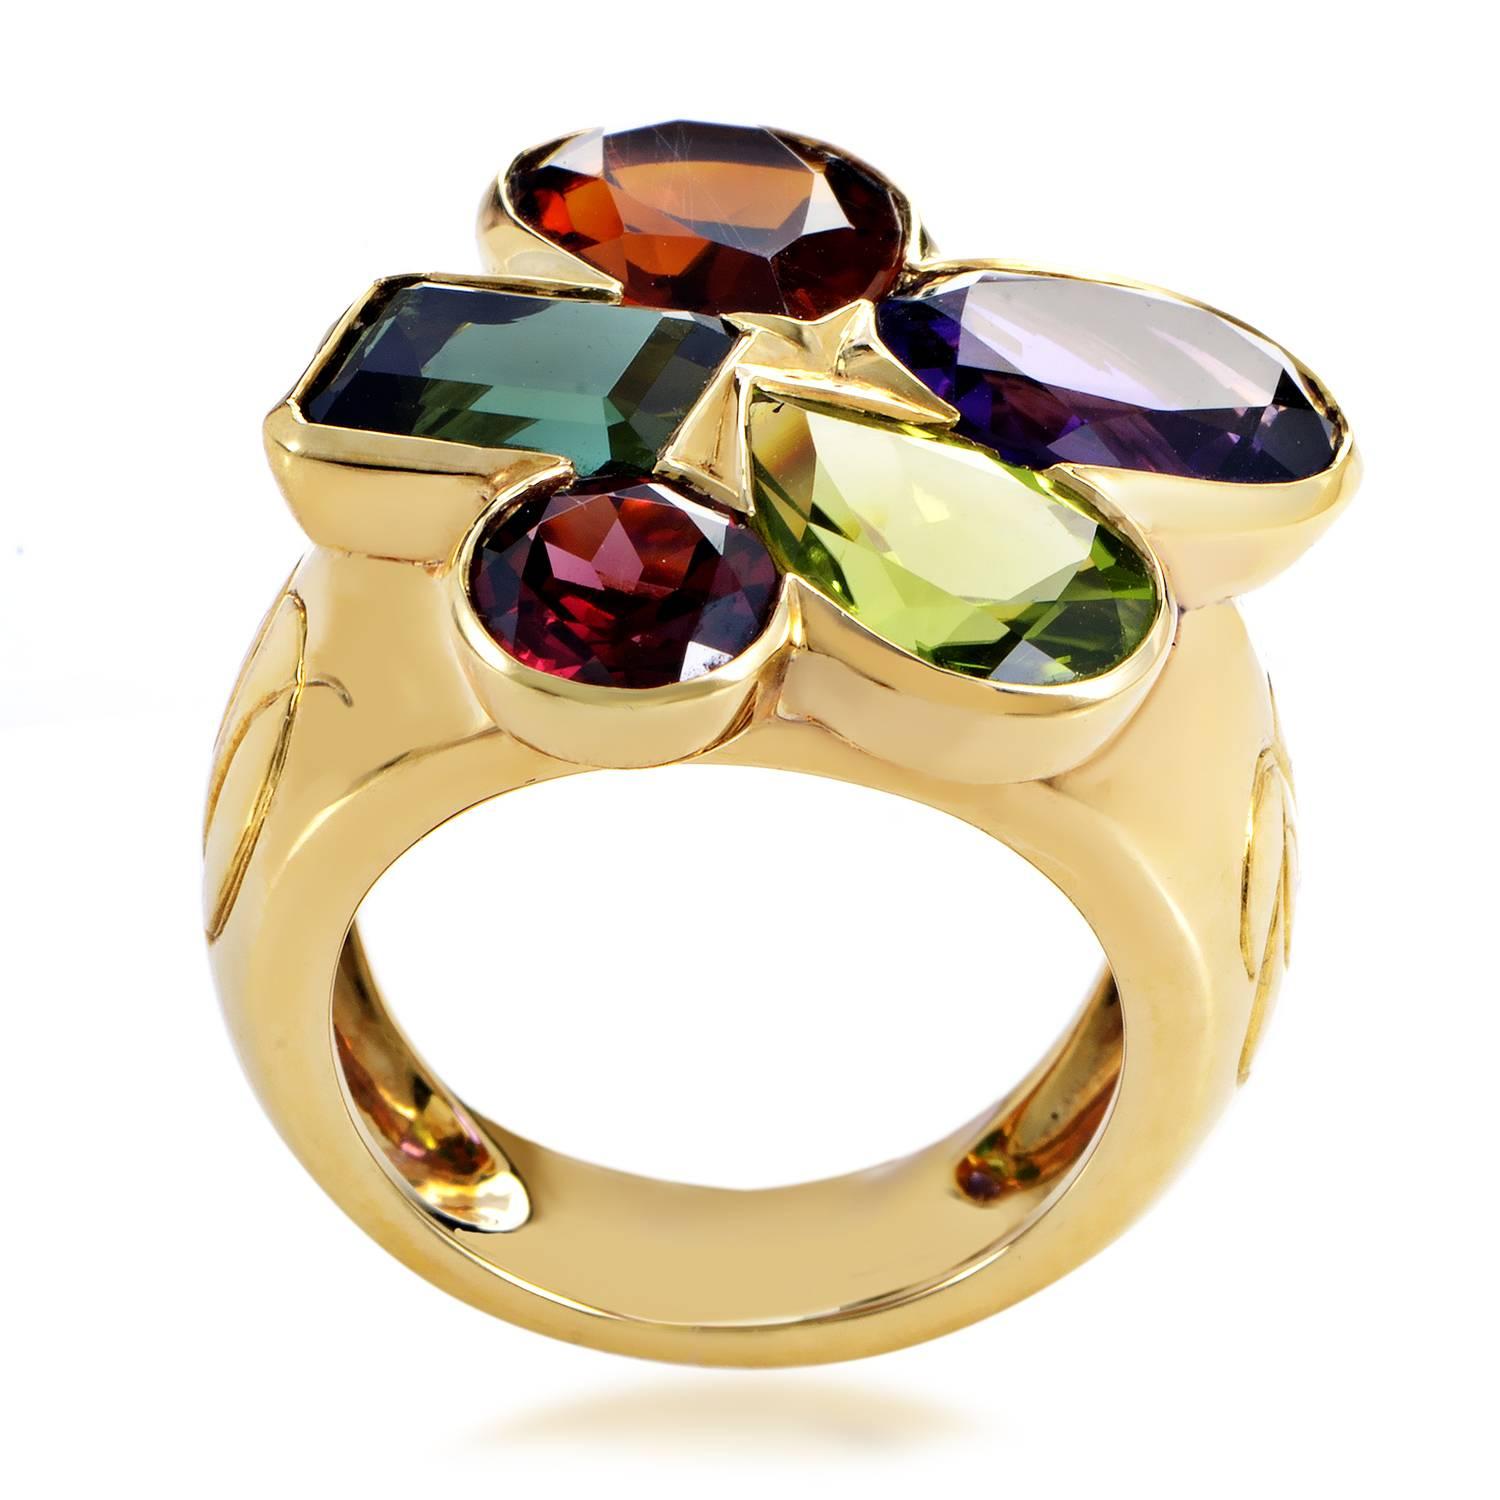 An exuberant and vivacious festival of vivid colors is brilliantly arranged upon this extraordinary ring from Dior, with preciously gleaming 18K yellow gold providing the perfect backdrop for the delightfully nuanced sparkle of eye-catching